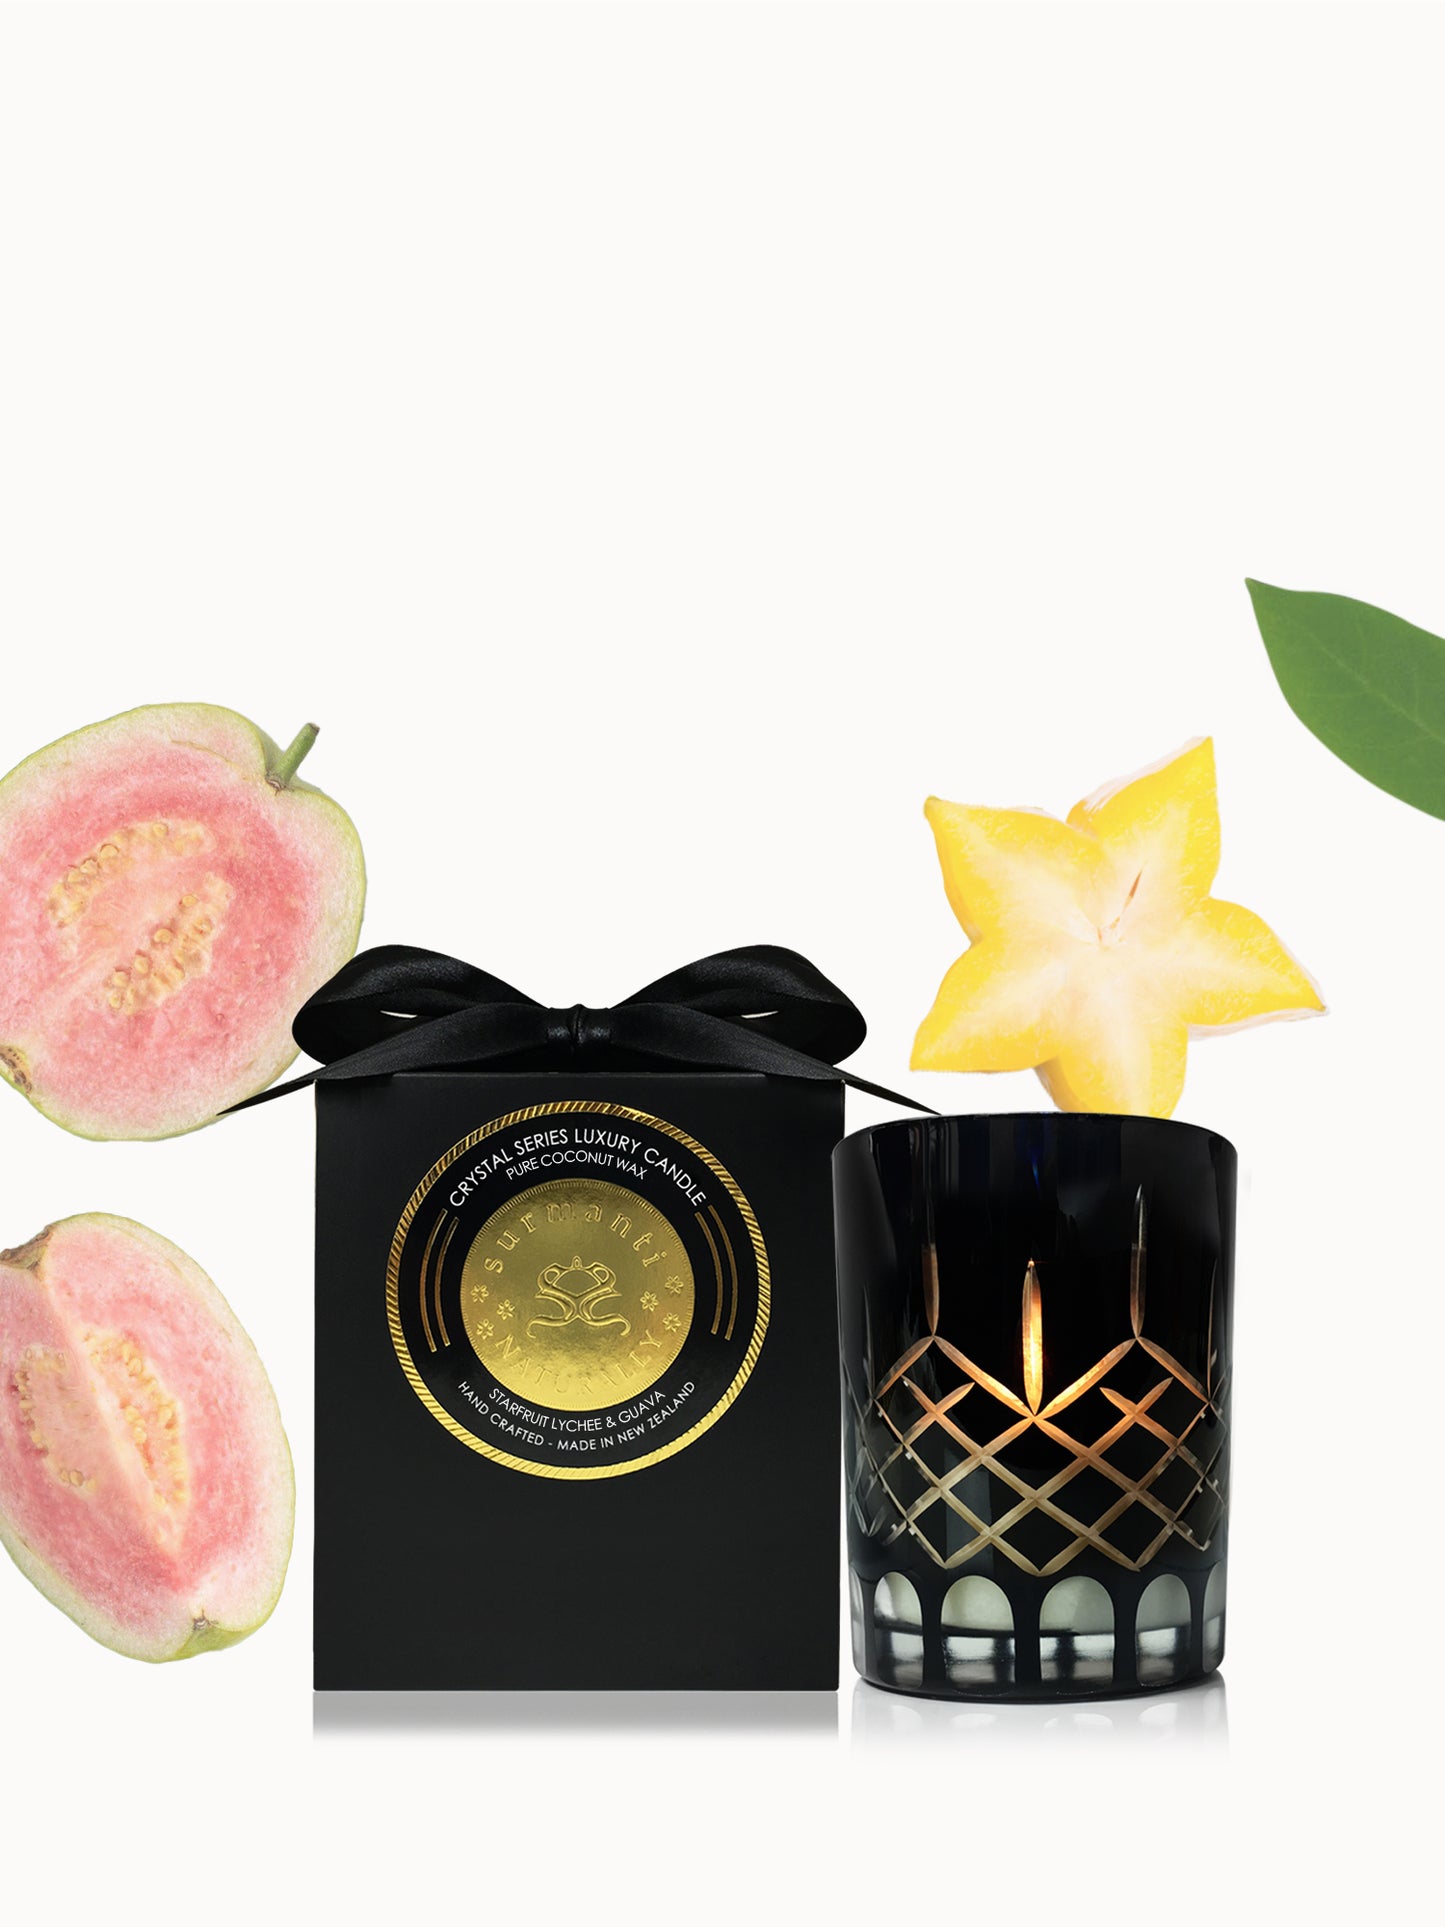 Starfruit Lychee & Guava Crystal Series 150g Candle